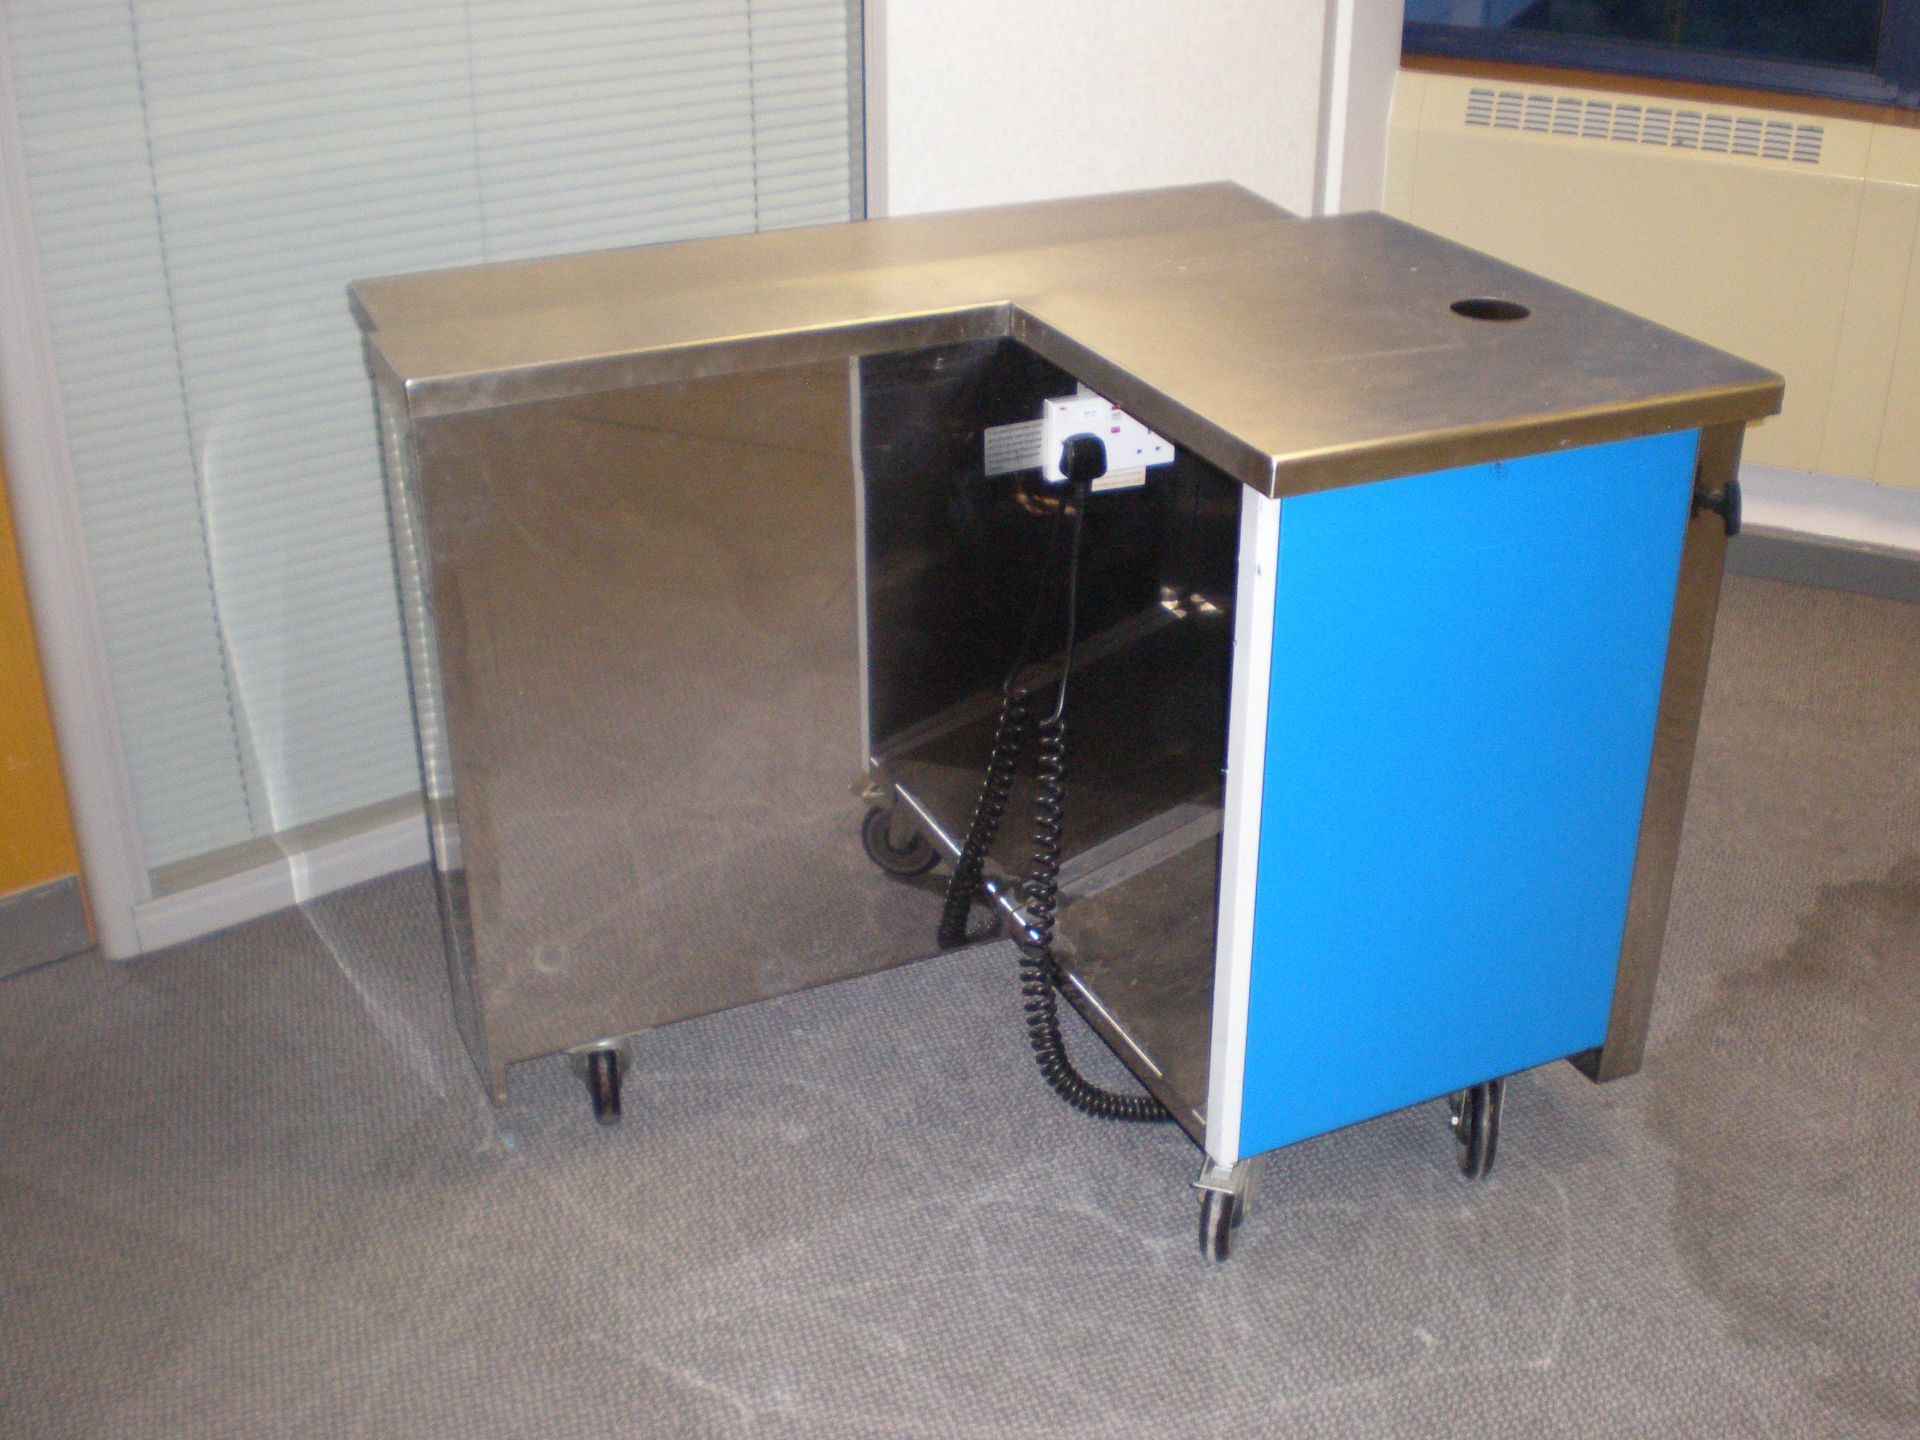 Canteen Stainless Steel Trolly Pay Station For Till, On Wheels, Collapsable Shelf For Trays, 2 - Image 6 of 6